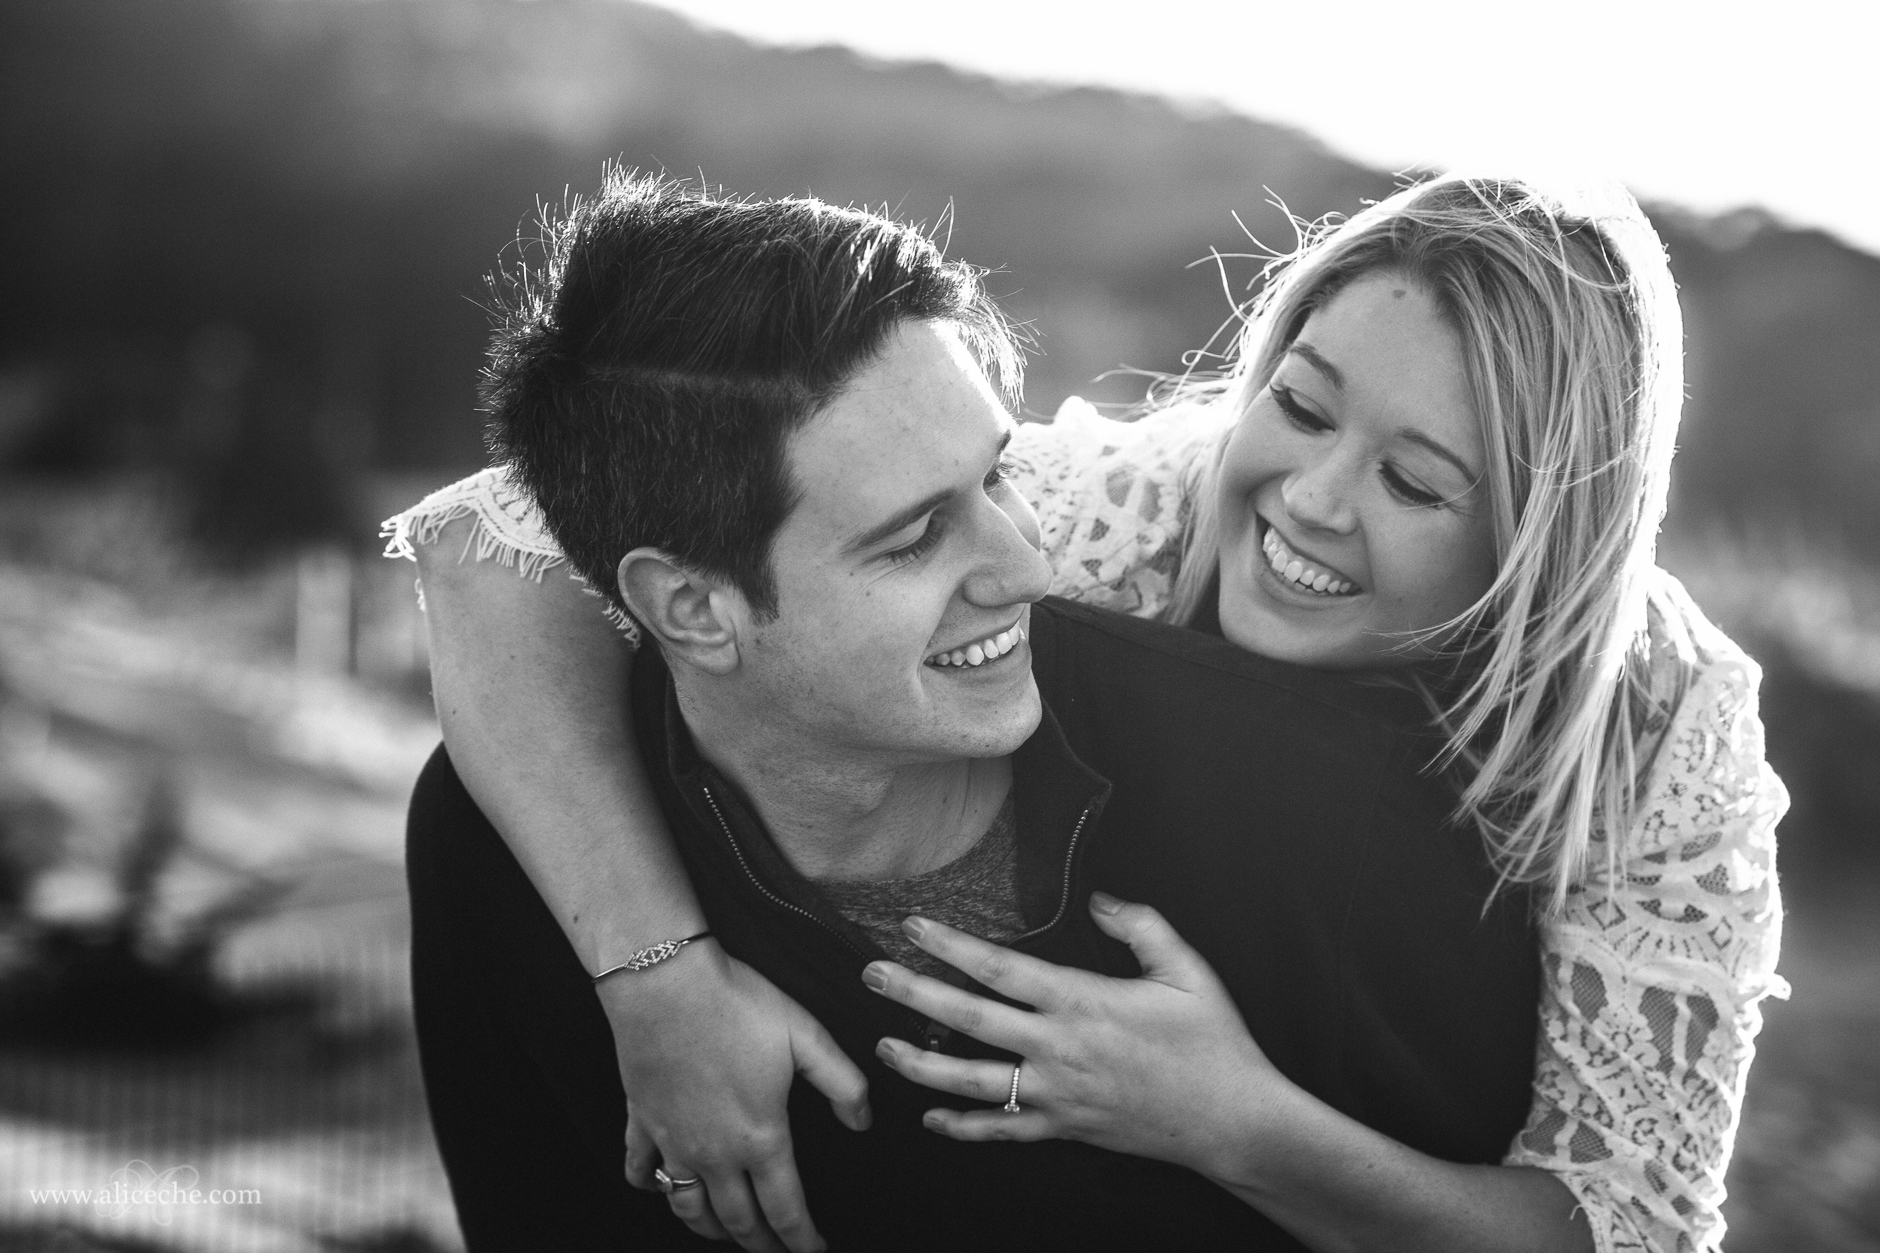 alice-che-photography-san-francisco-engagement-shoot-crissy-field-guy-giving-piggyback-ride